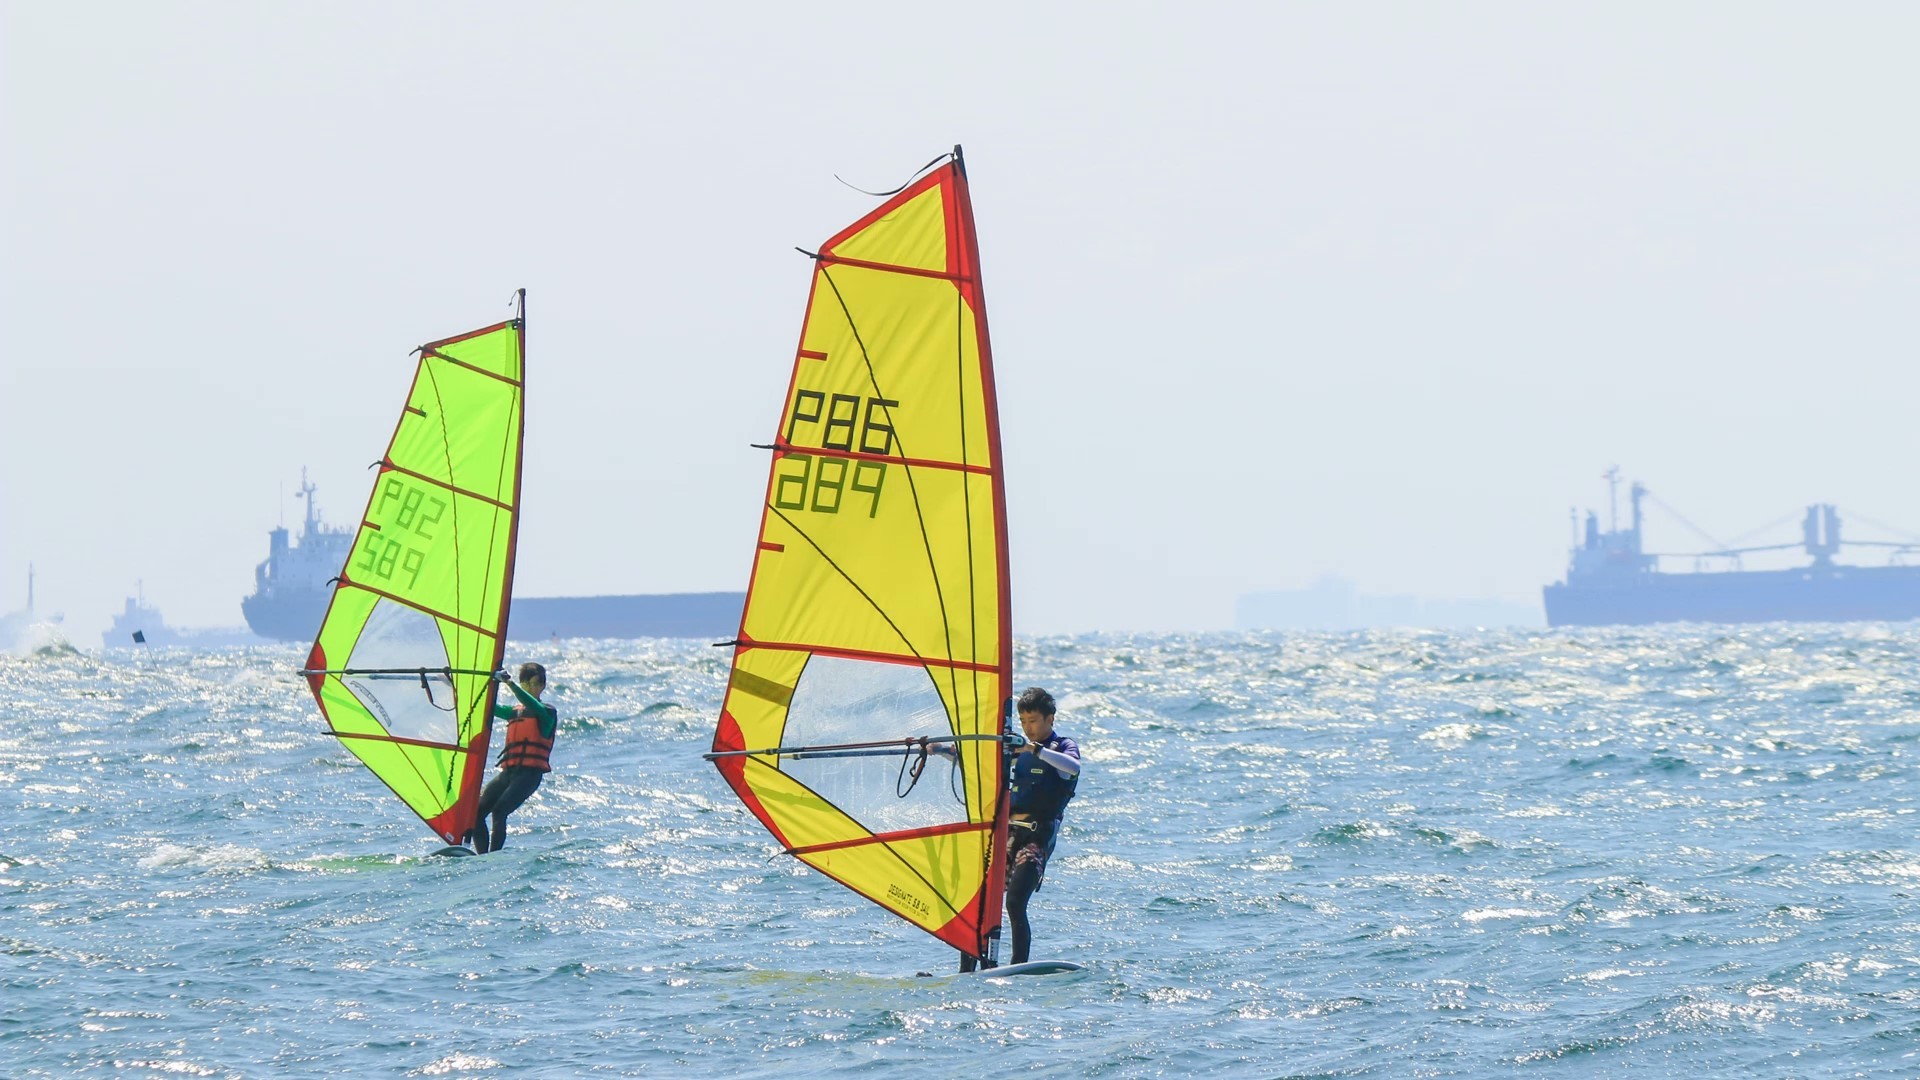 Windsurfing practice (photo provided by NSYSU Sailing Club)